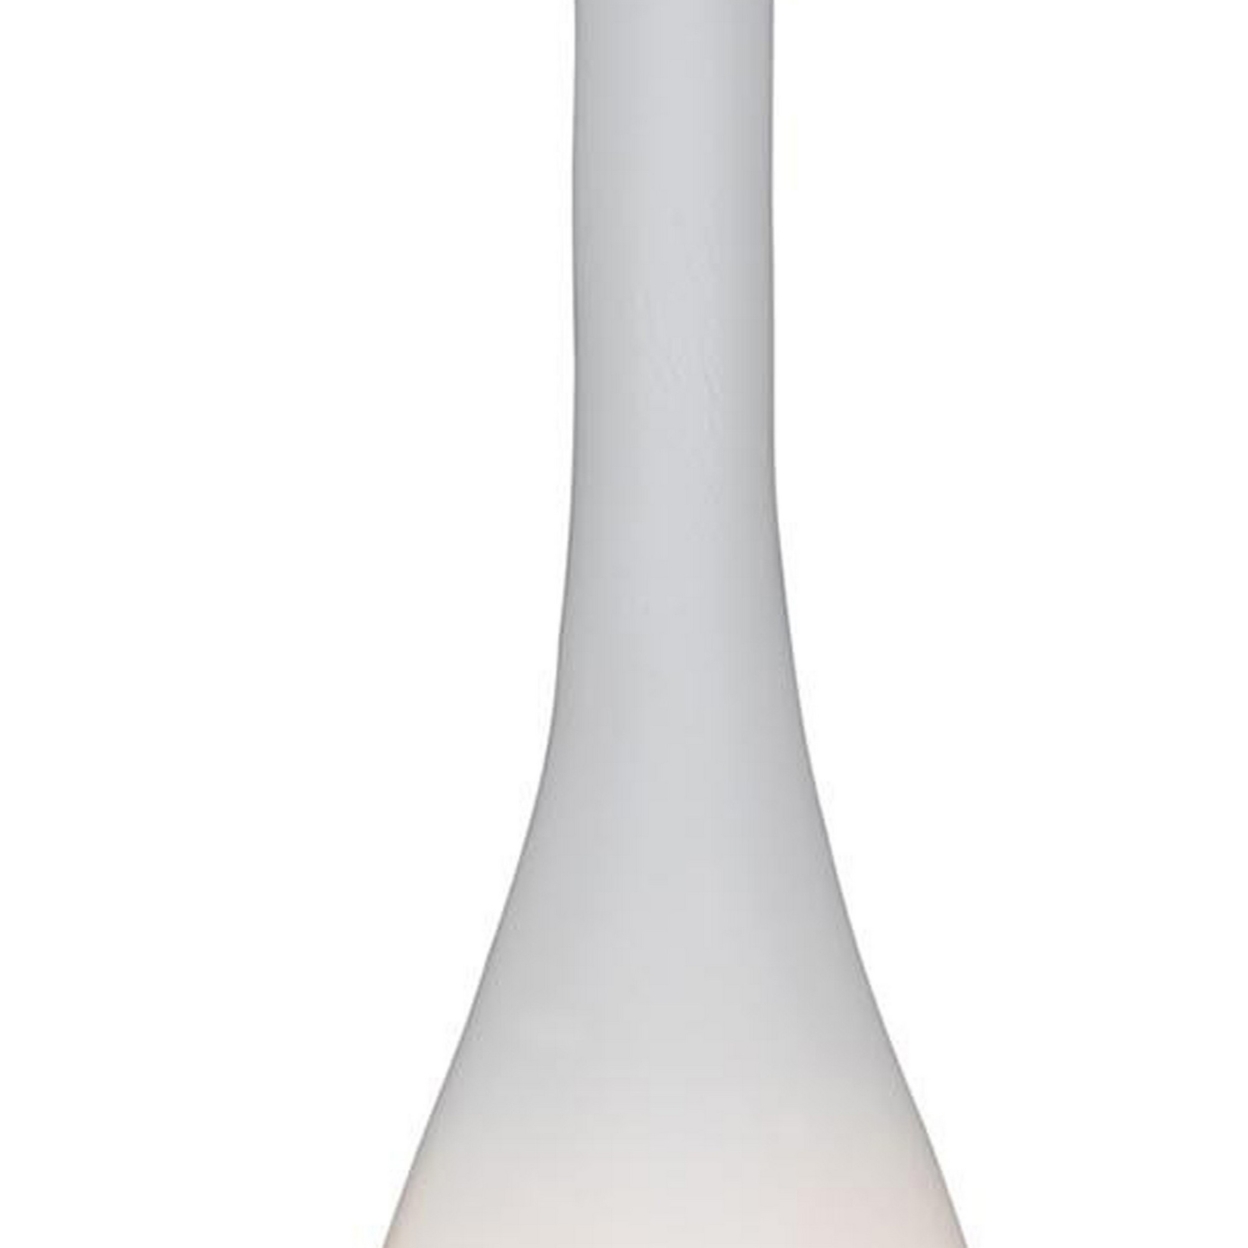 Bottle Shape Glass Hanging Lamp With Stripes And Cut Out Details, White- Saltoro Sherpi